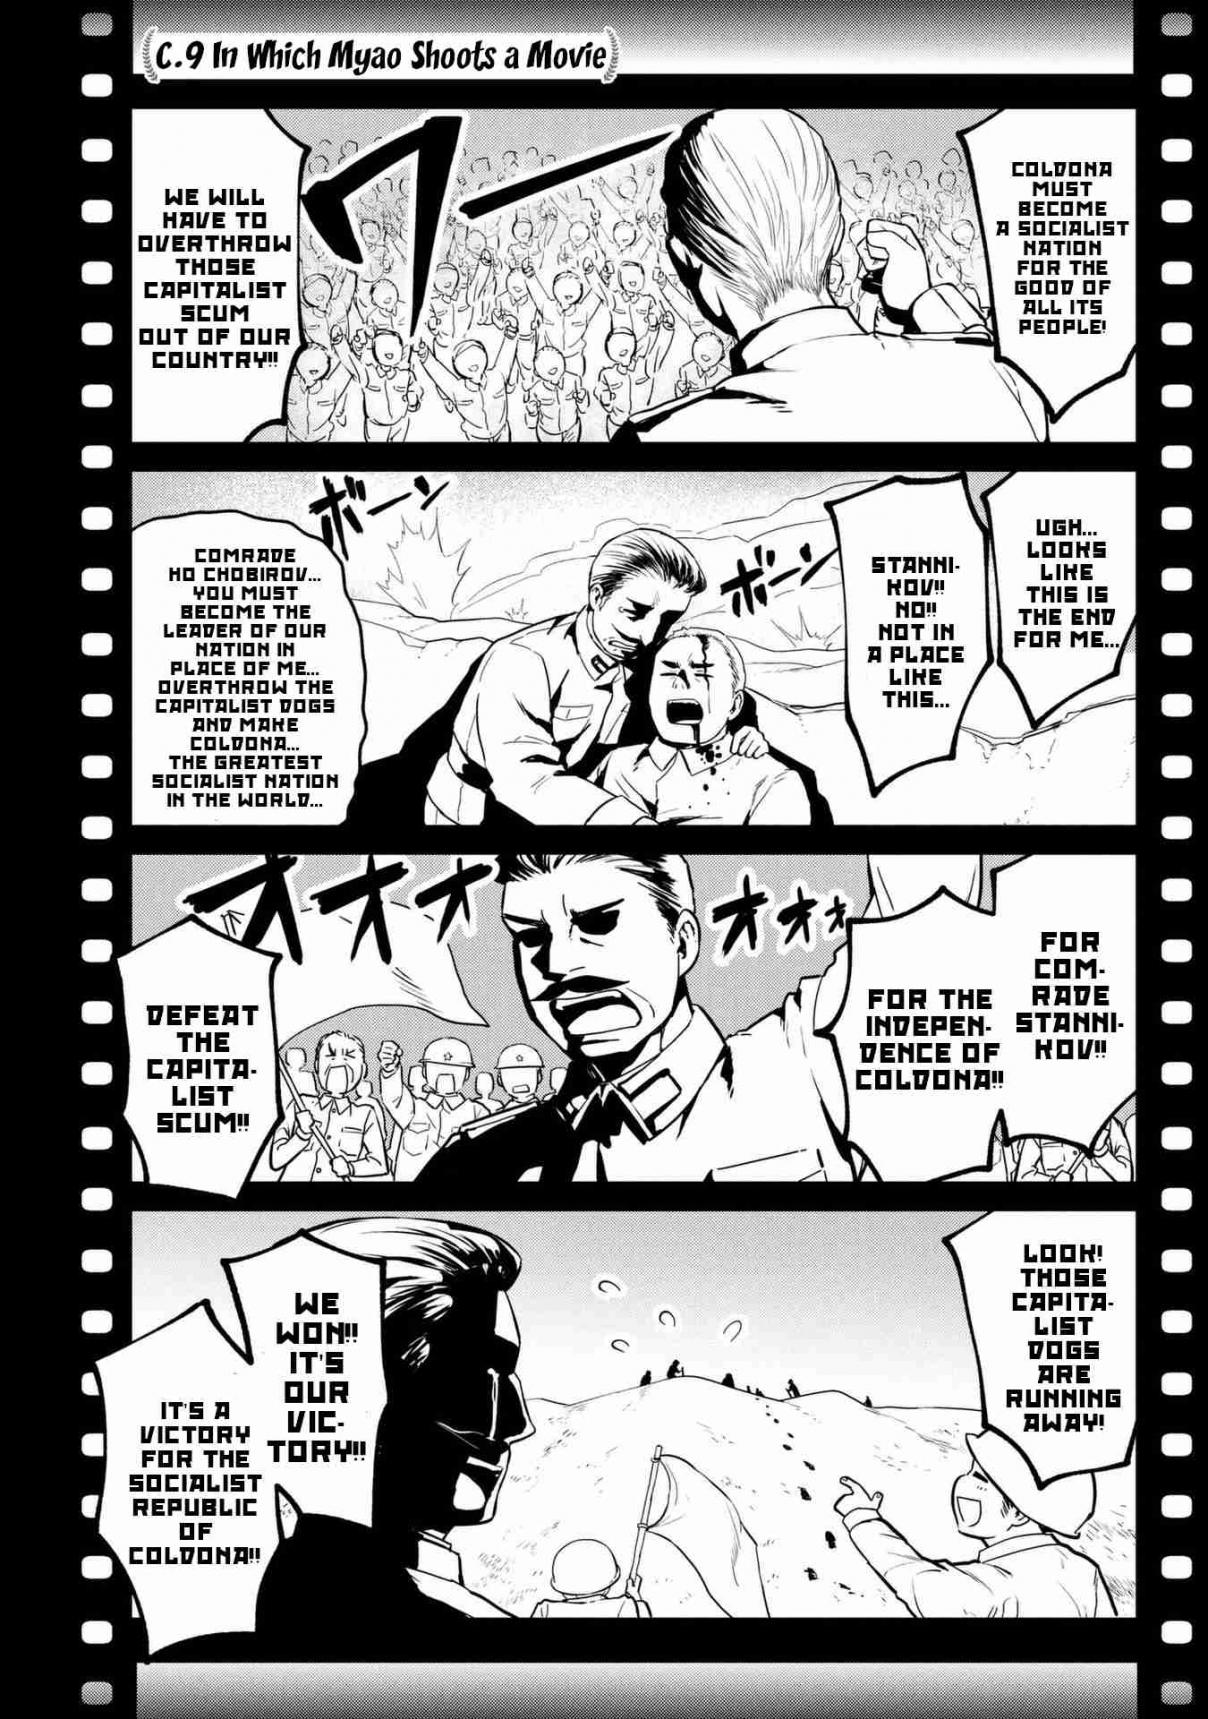 Oh, Our General Myao Vol. 1 Ch. 9 In Which Myao Shoots a Movie